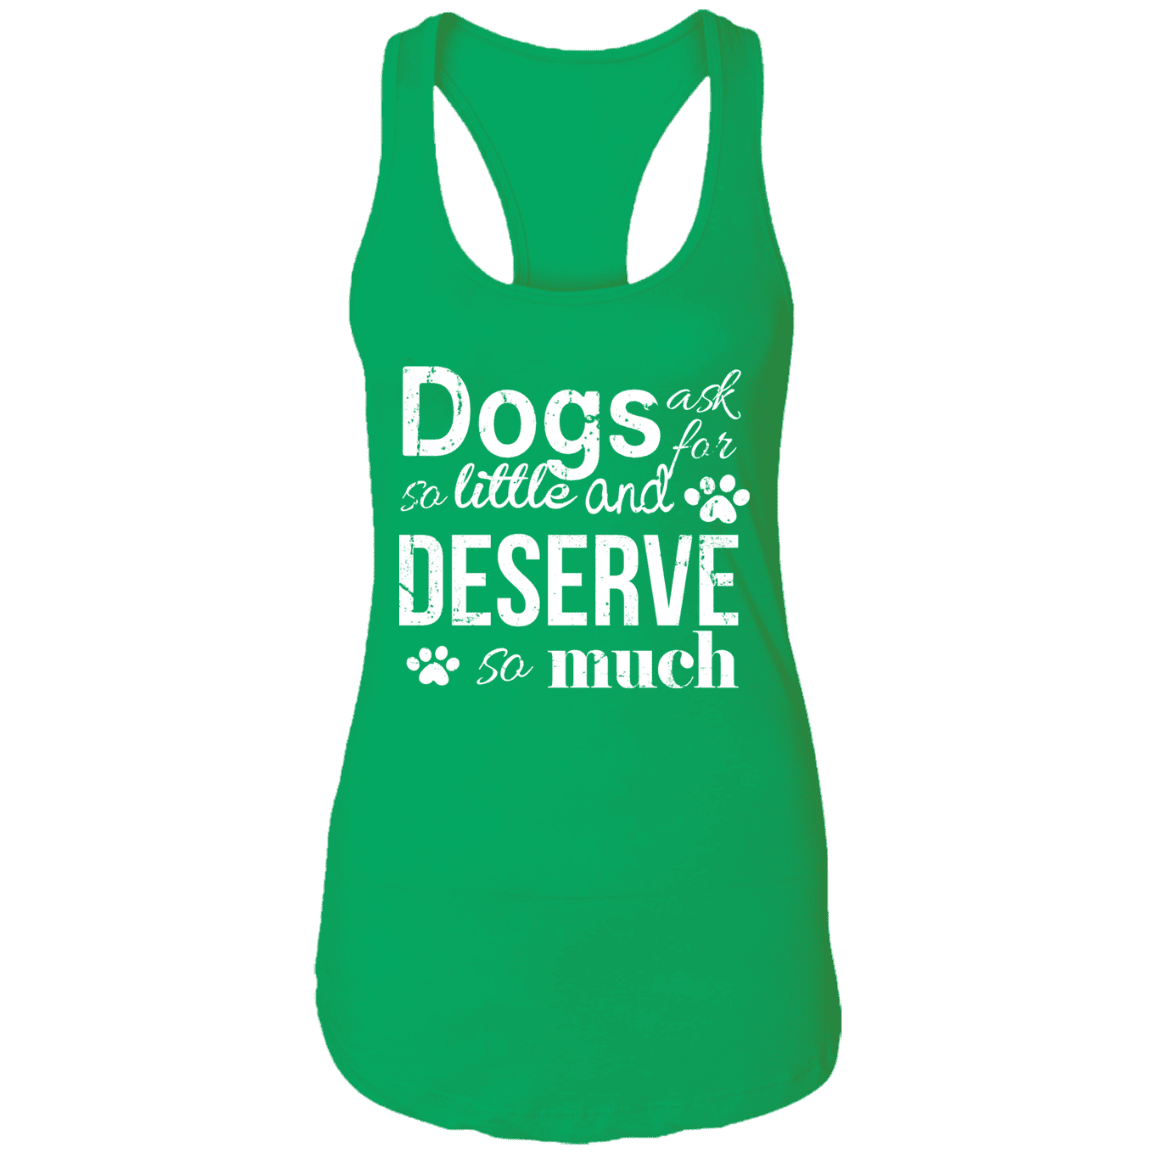 Dogs Deserve So Much - Ladies Racer Back Tank.